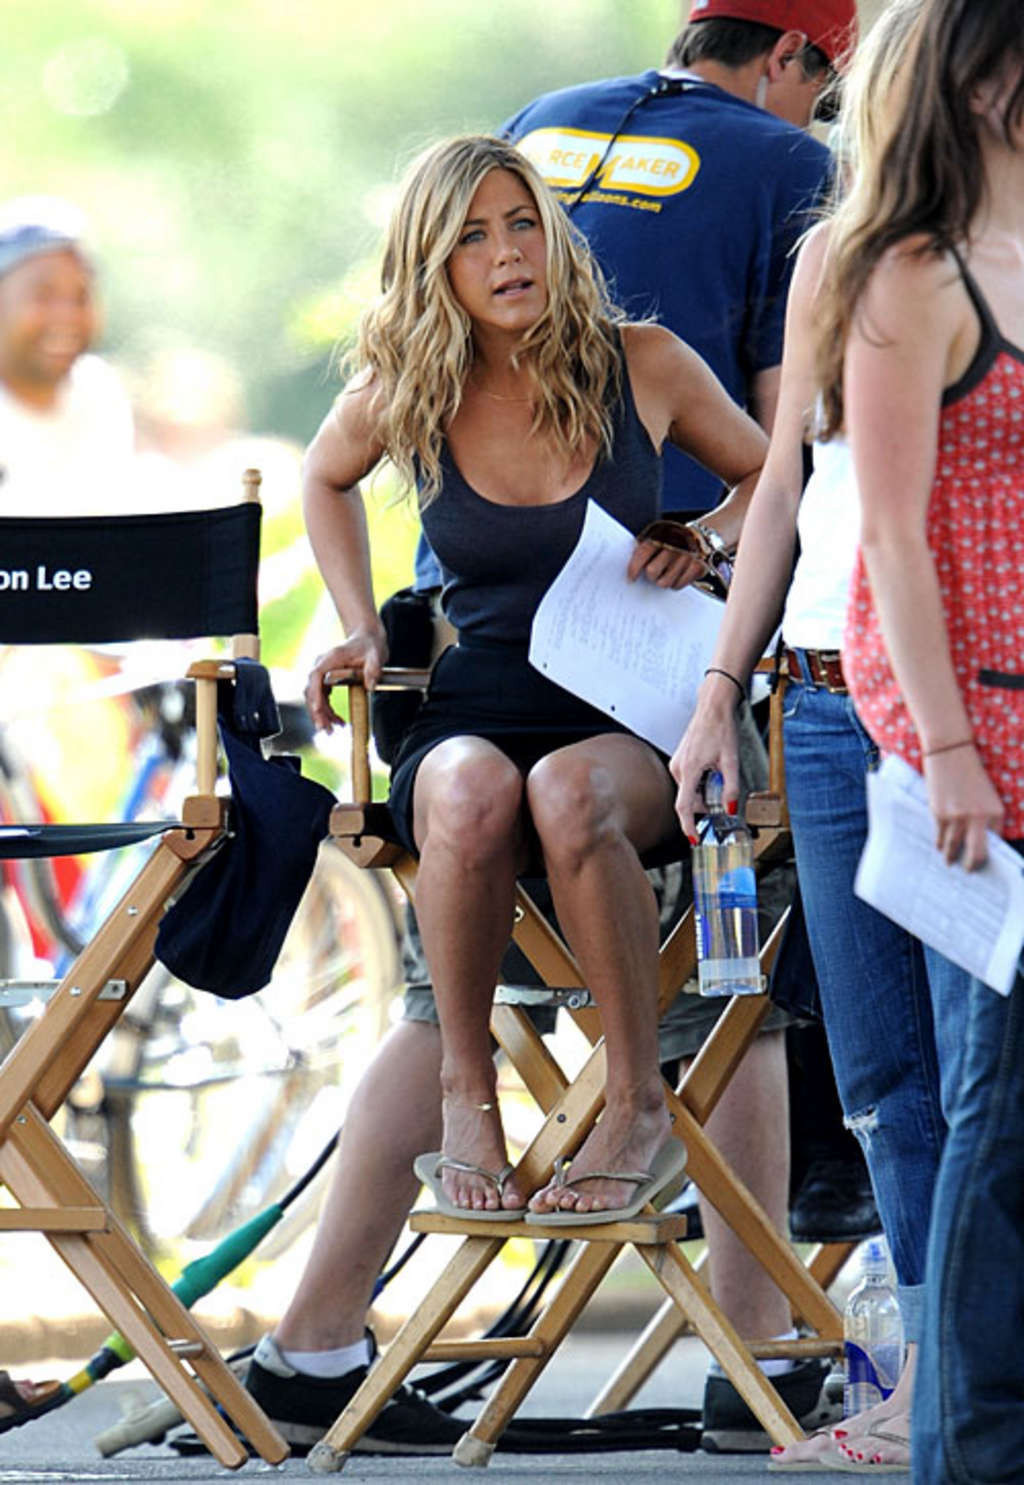 Jennifer Aniston almost upskirt and exposing her great tits and nice legs #75383895